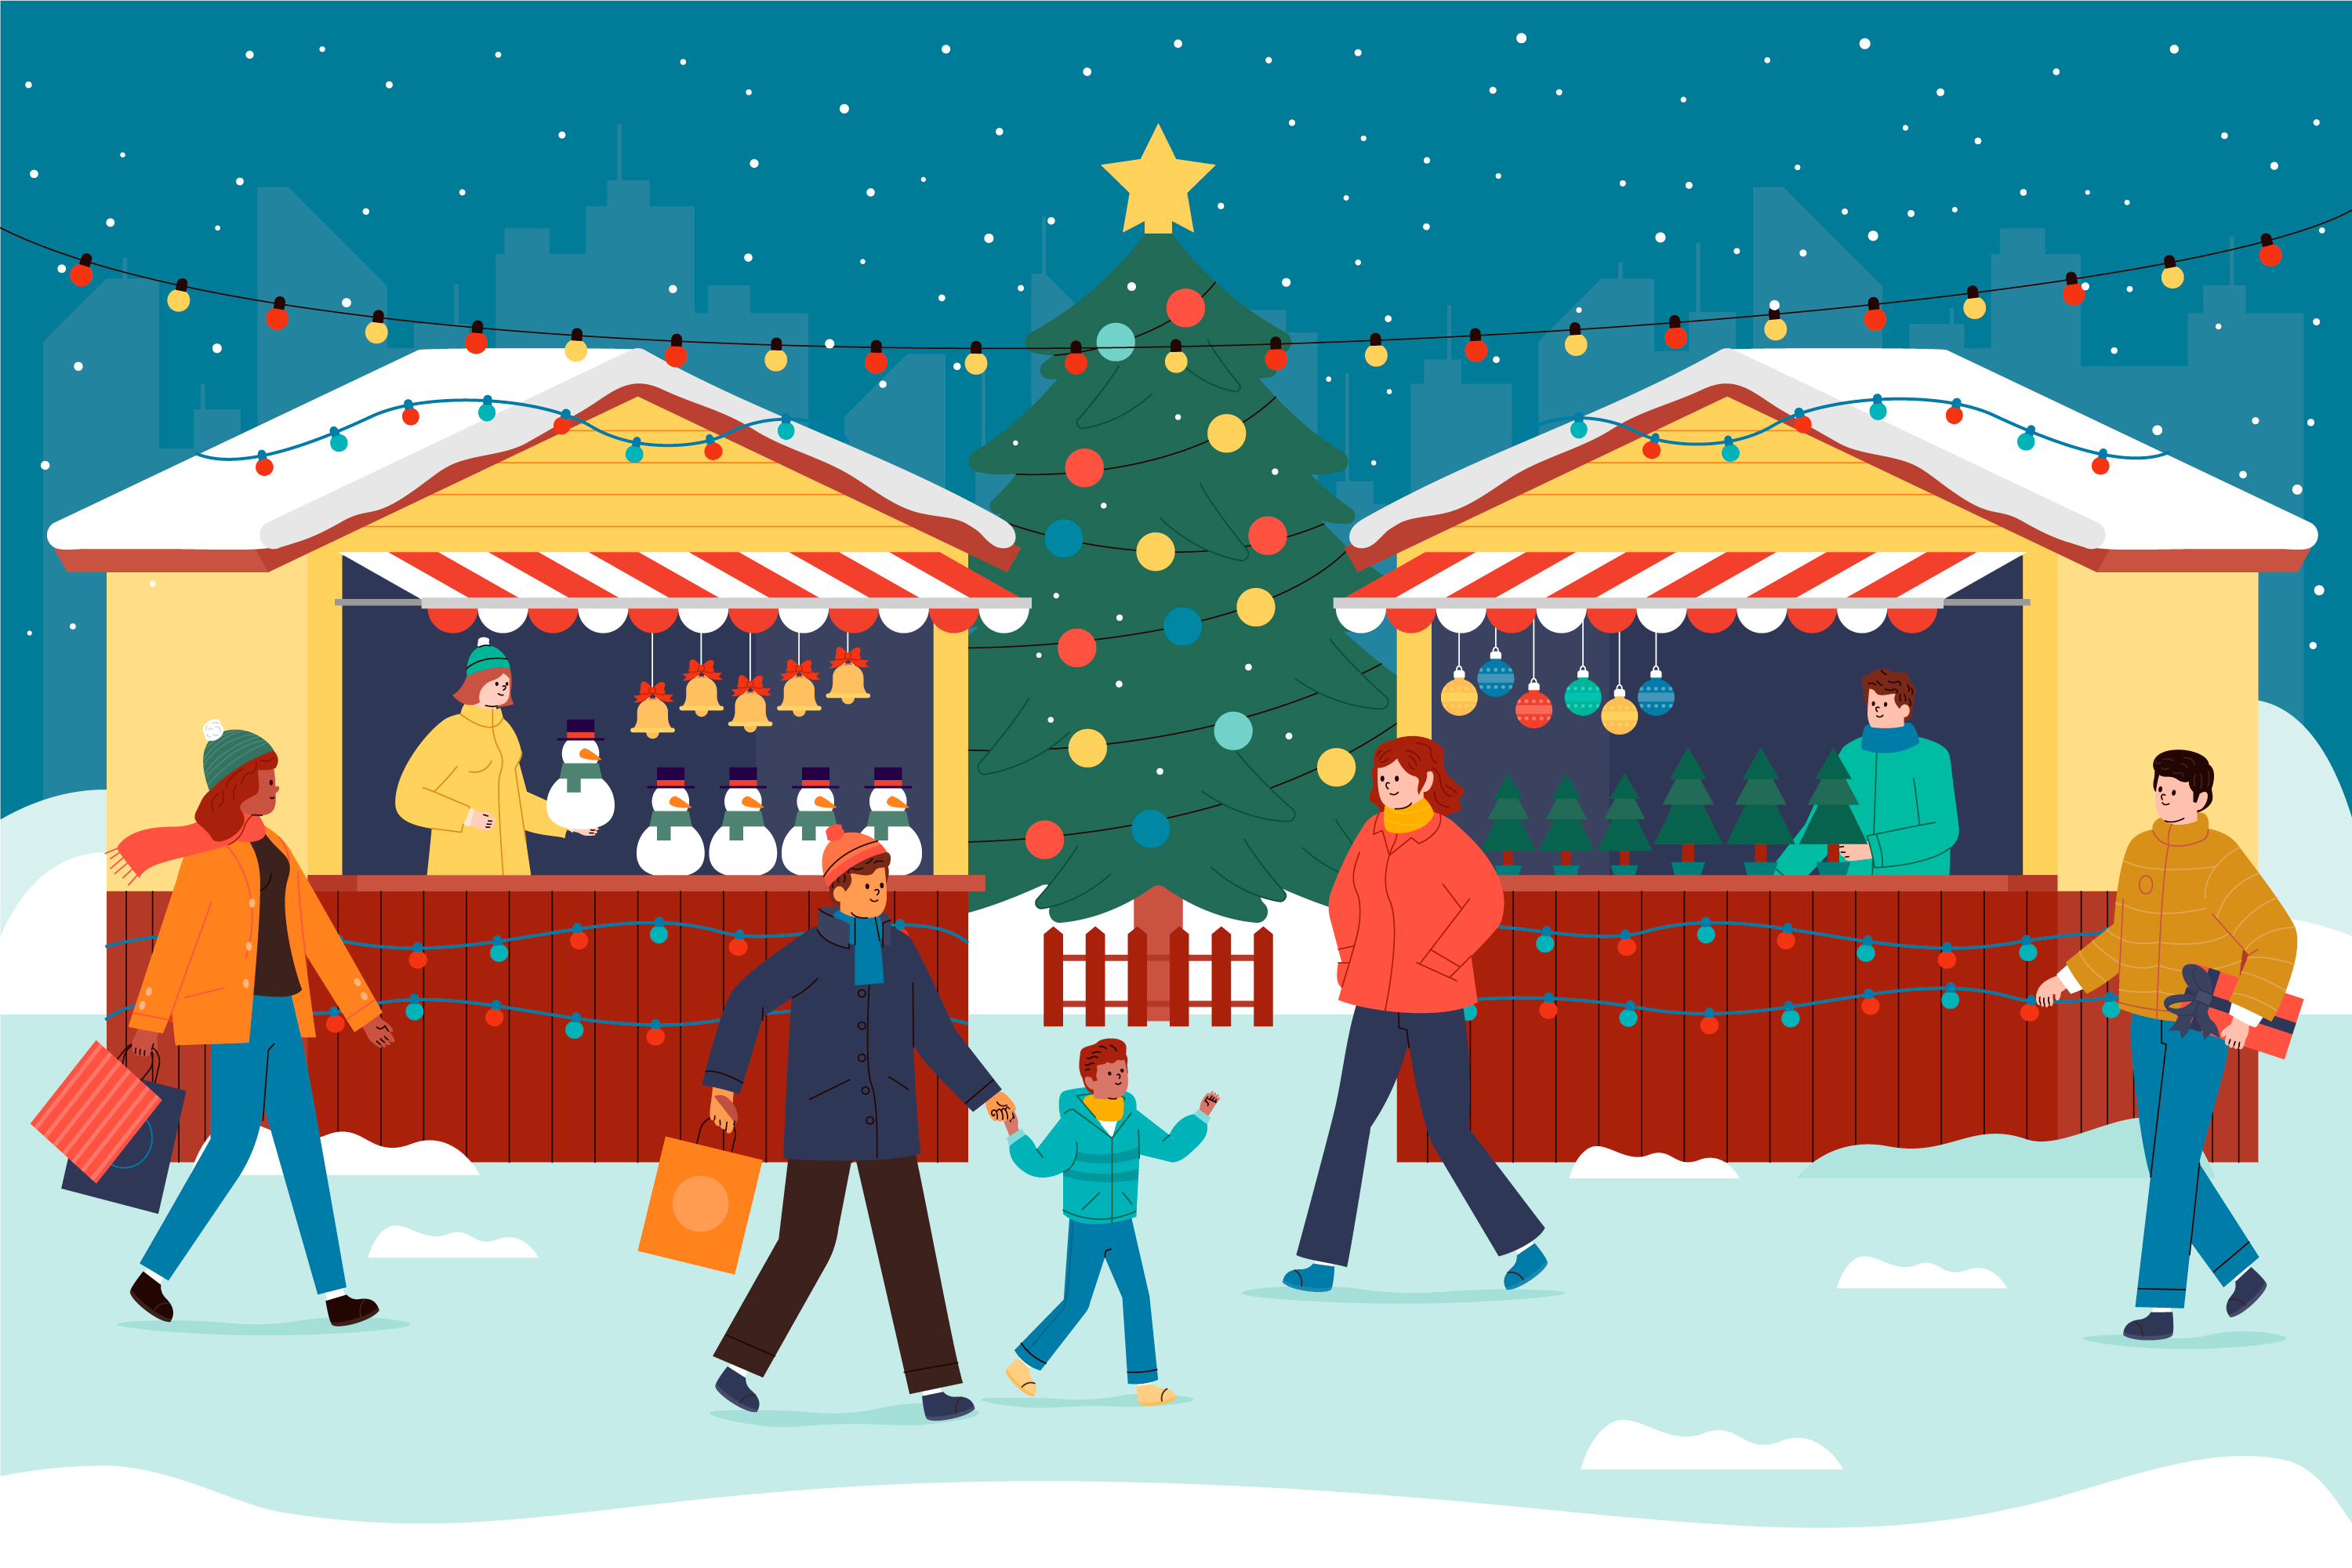 Elevating Your Marketing Game During the Christmas Season